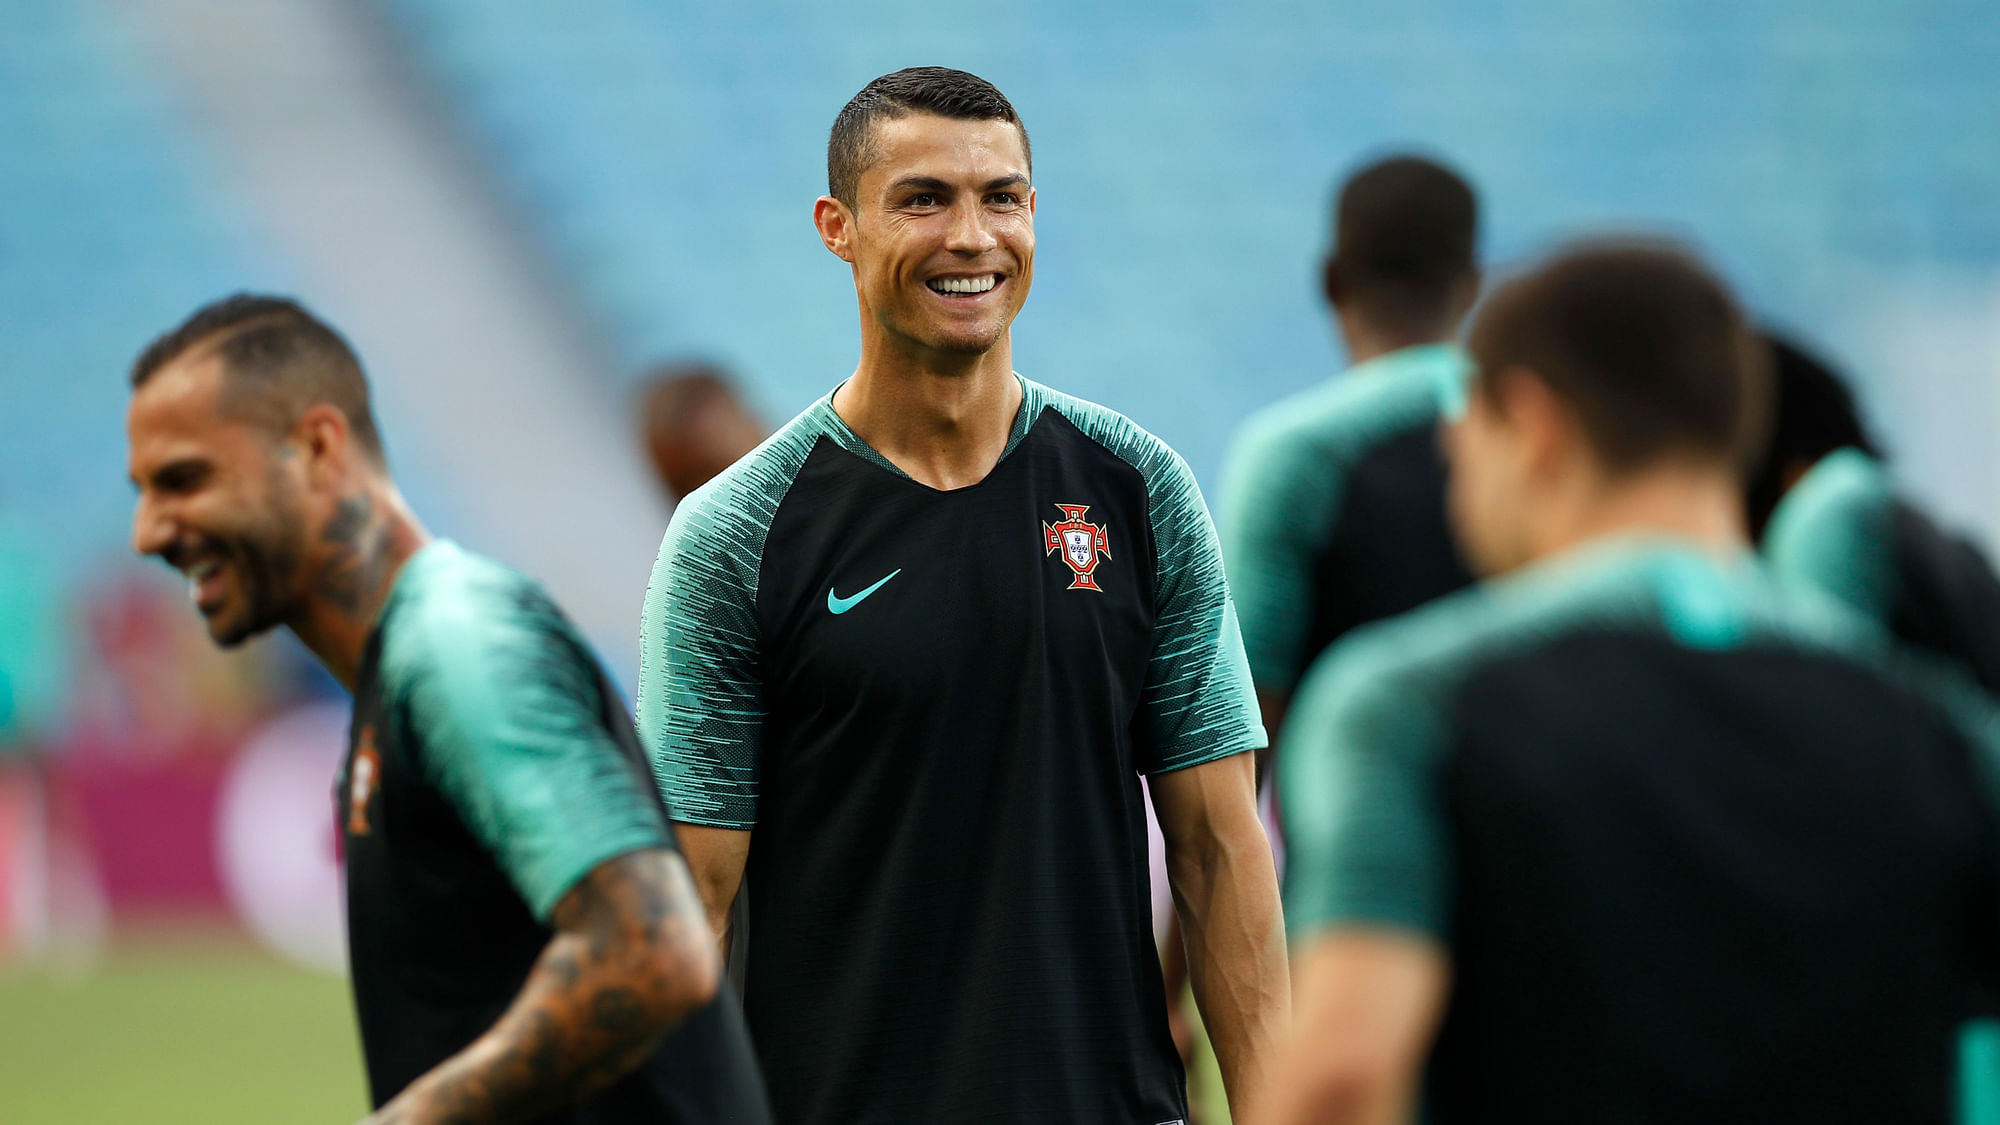 Portugal’s Cristiano Ronaldo, centre, smiles during Portugal’s official training on the eve of the group B match between Portugal and Spain.